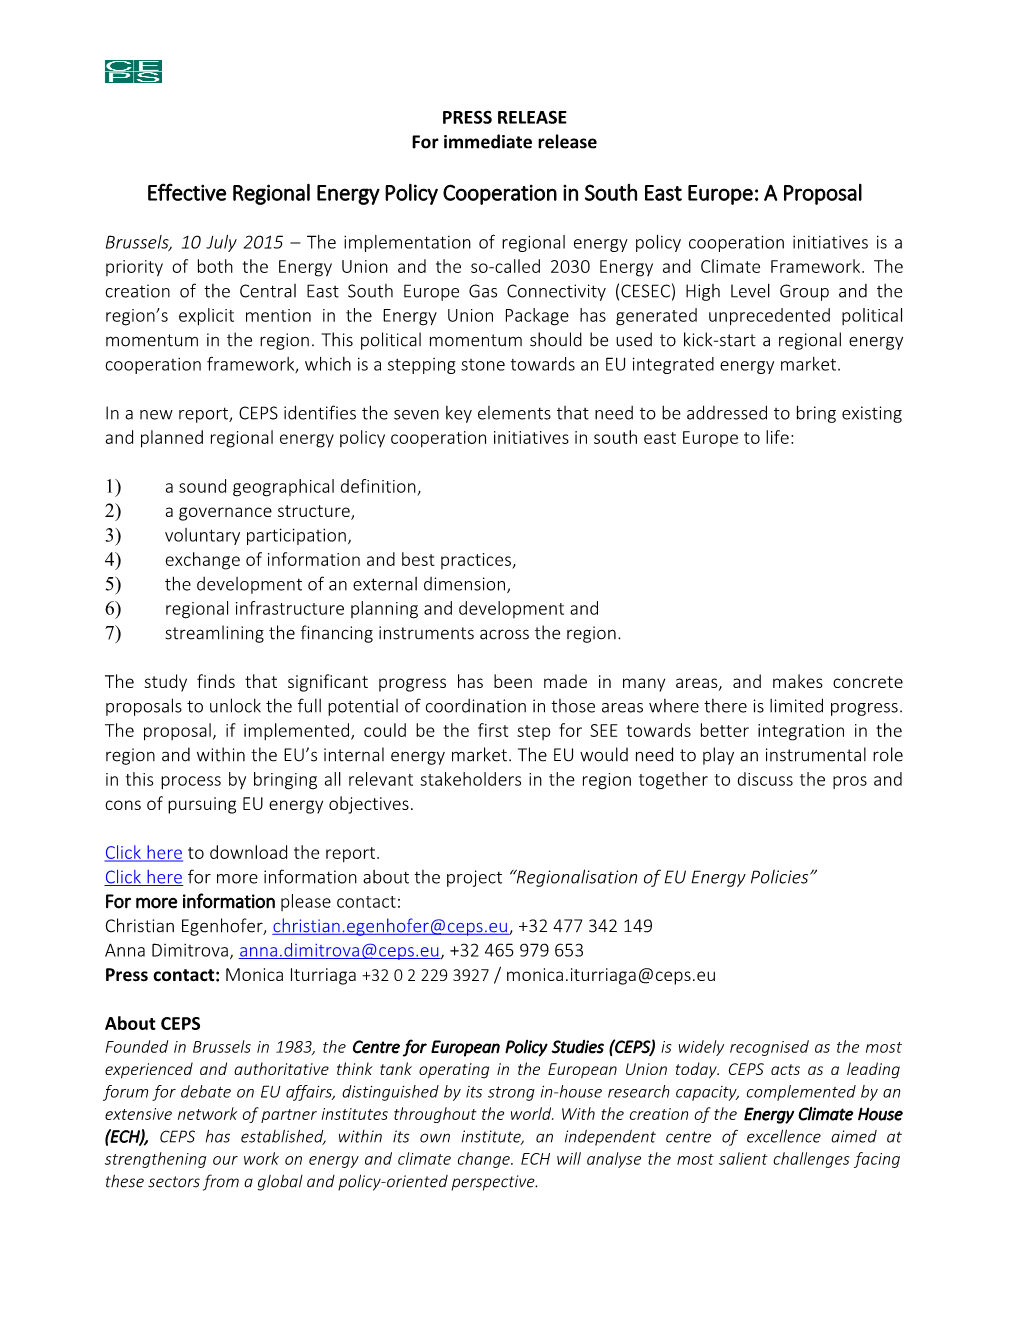 Effective Regional Energy Policy Cooperation in South East Europe: a Proposal